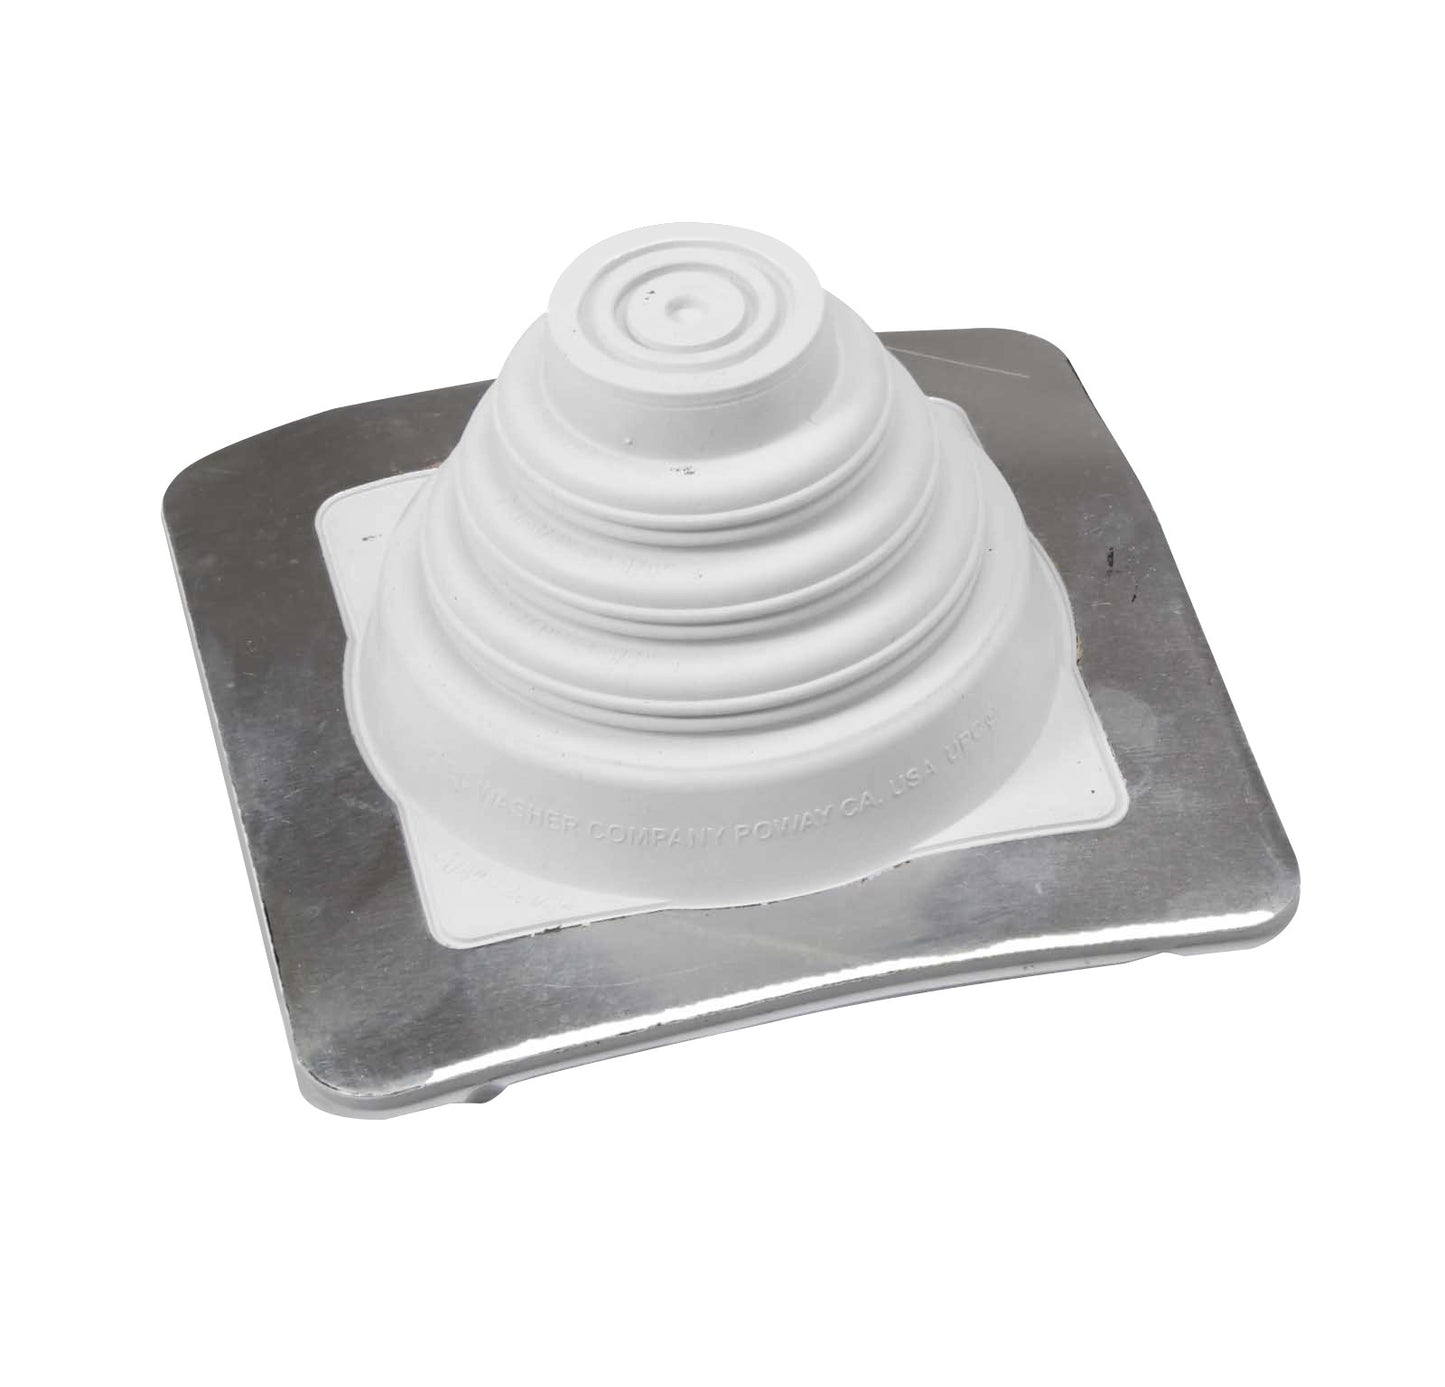 #1 Roofjack Square EPDM Pipe Flashing Boot White